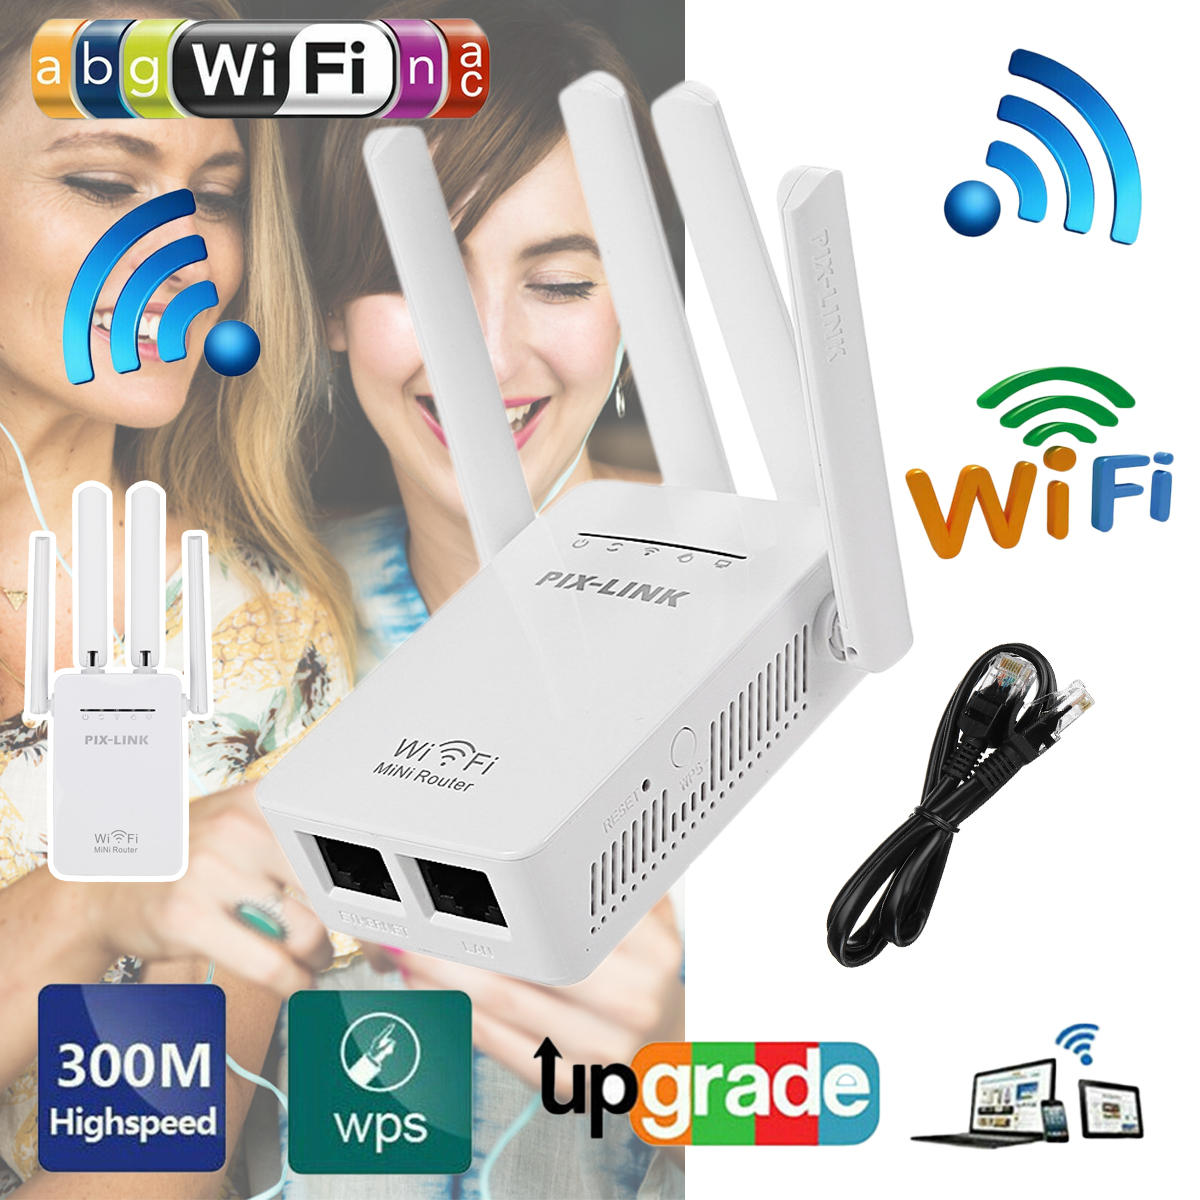 

Wifi Repeater Router 300Mbps 2.4GHz Hot Wifi Repeater Wireless Router Range Extender Signal Booster with Antenna